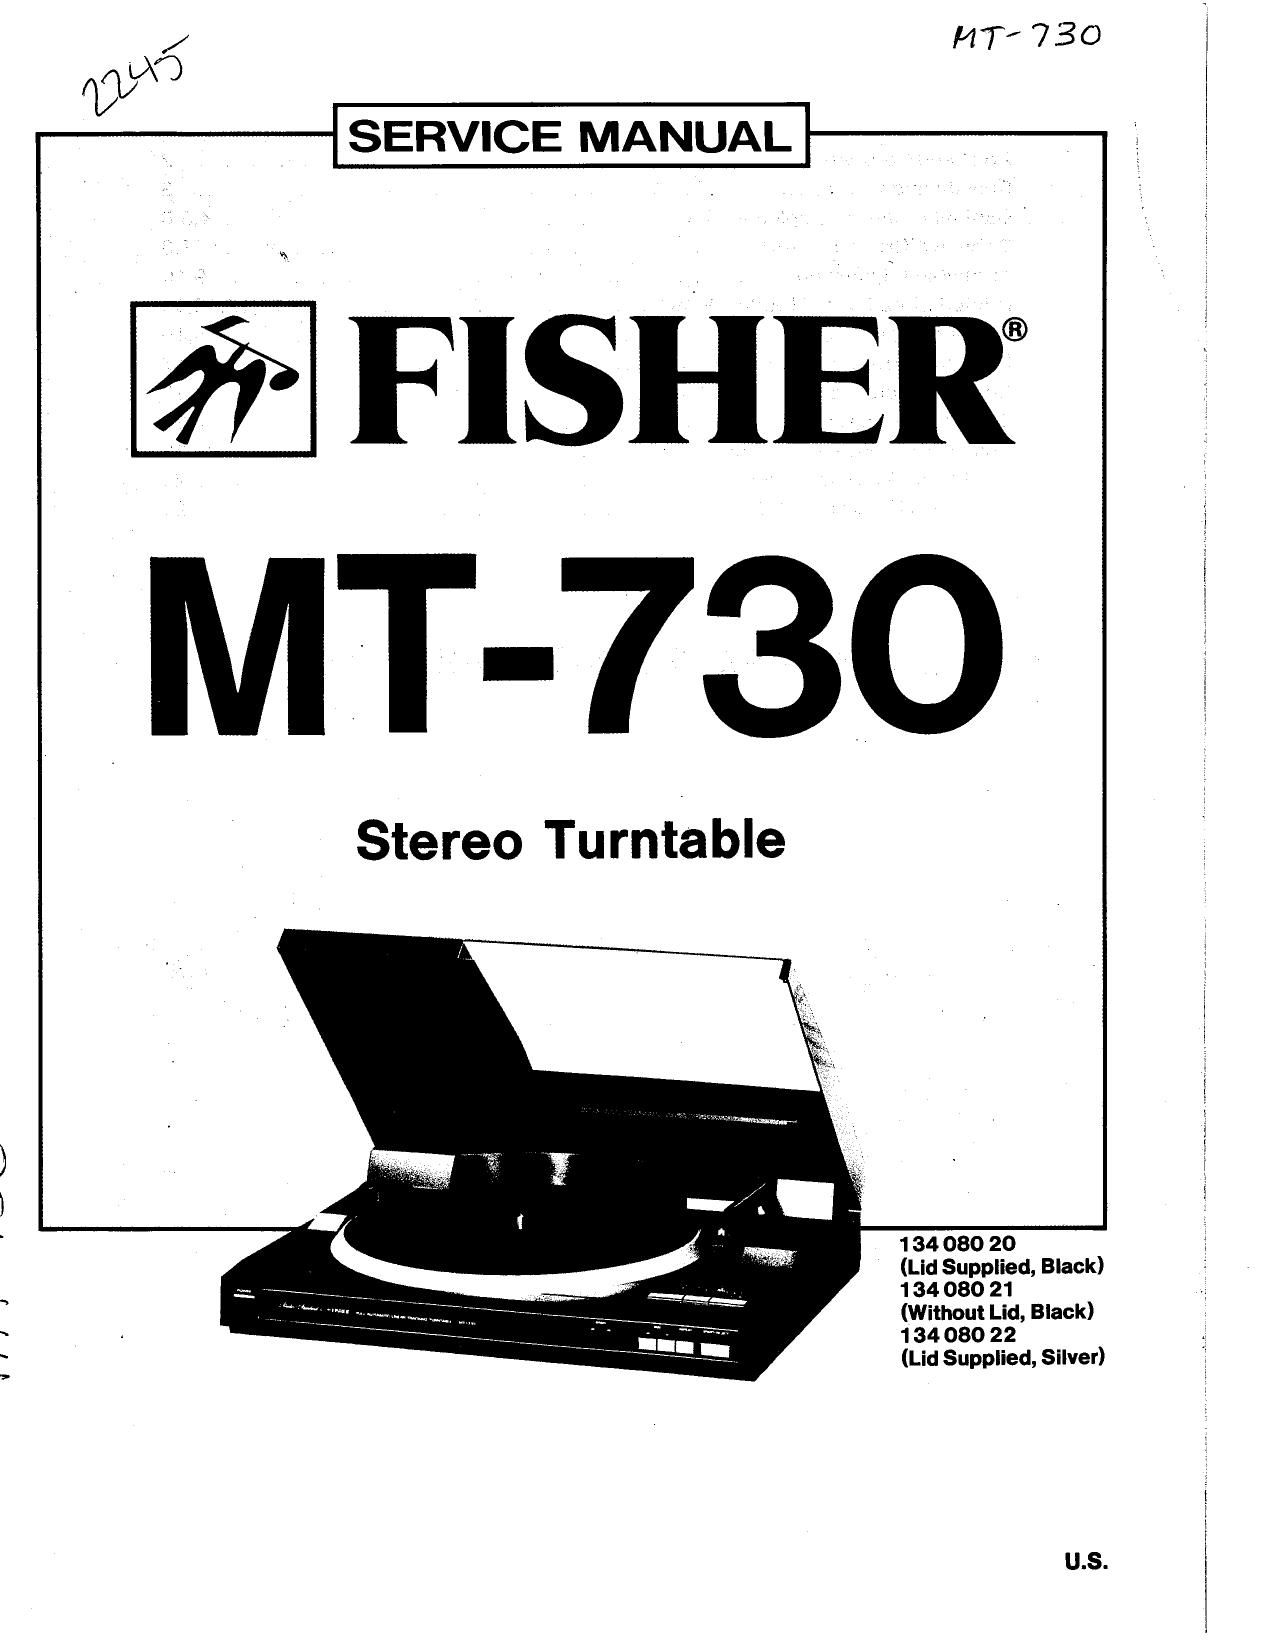 Fisher MT 730 Service Manual